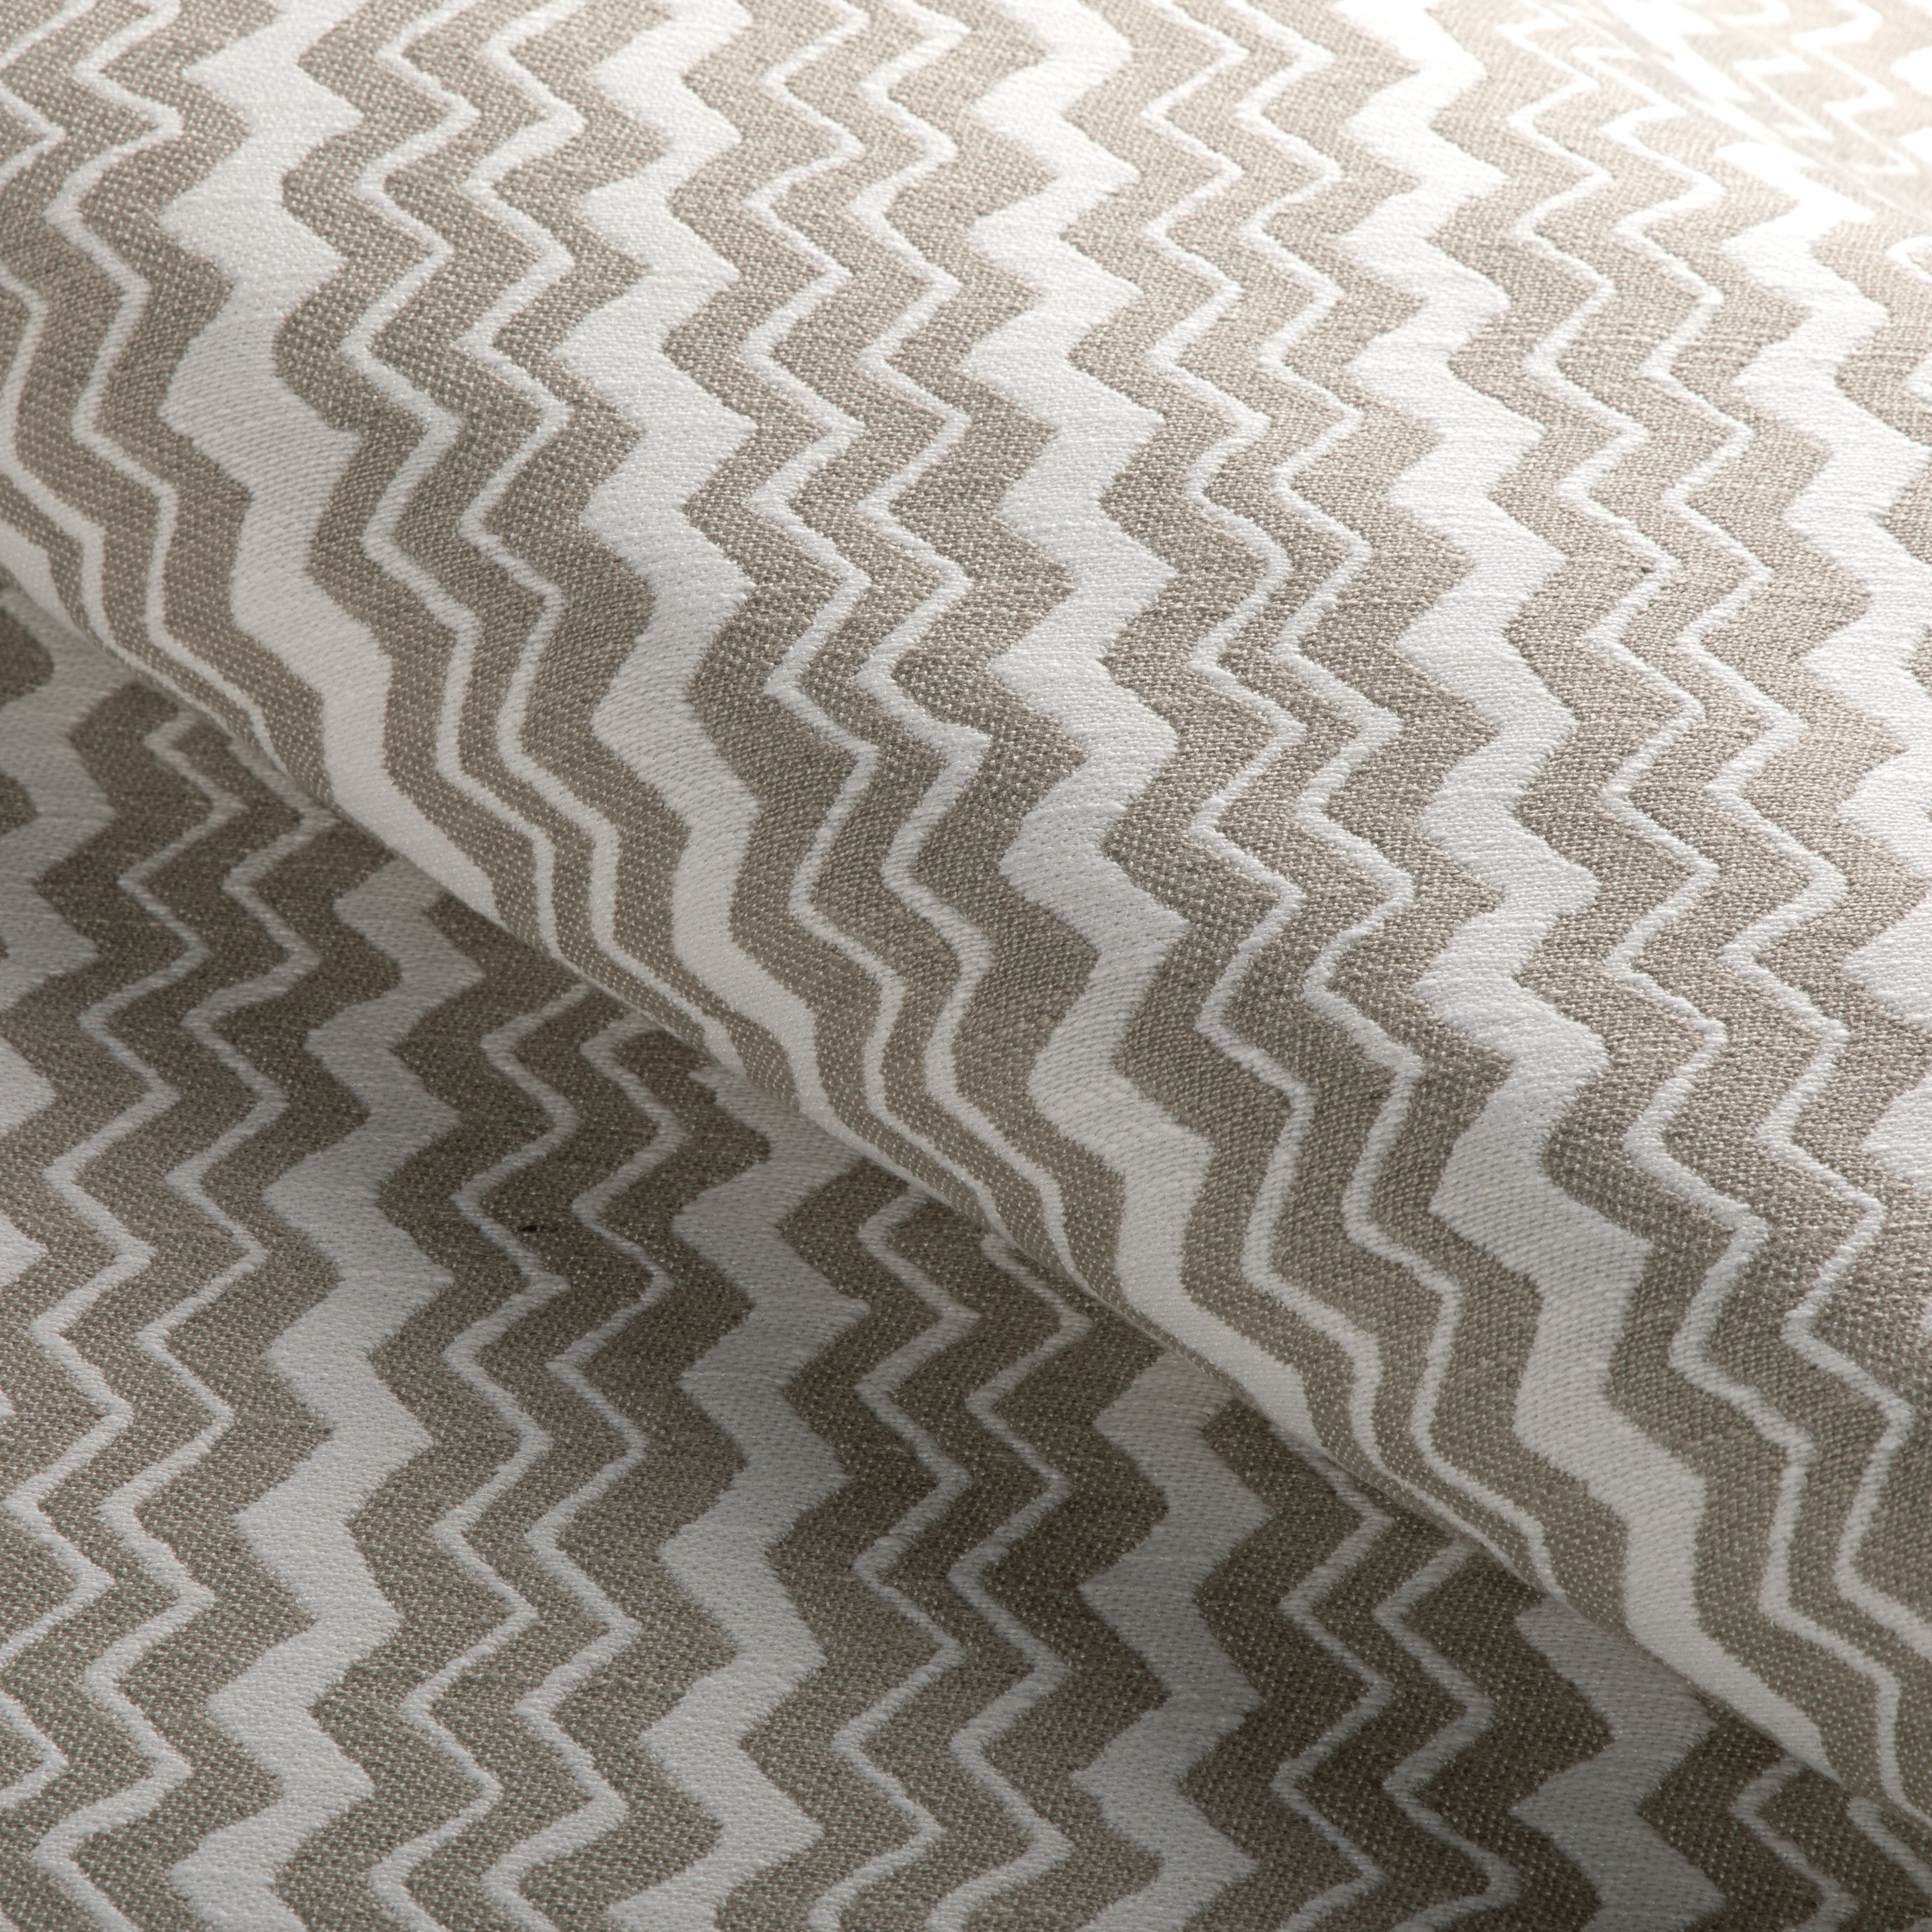 Fabric sample of Matipi fabric in sand color - pattern 36925.16.0 - by Kravet Couture in the Riviera collection